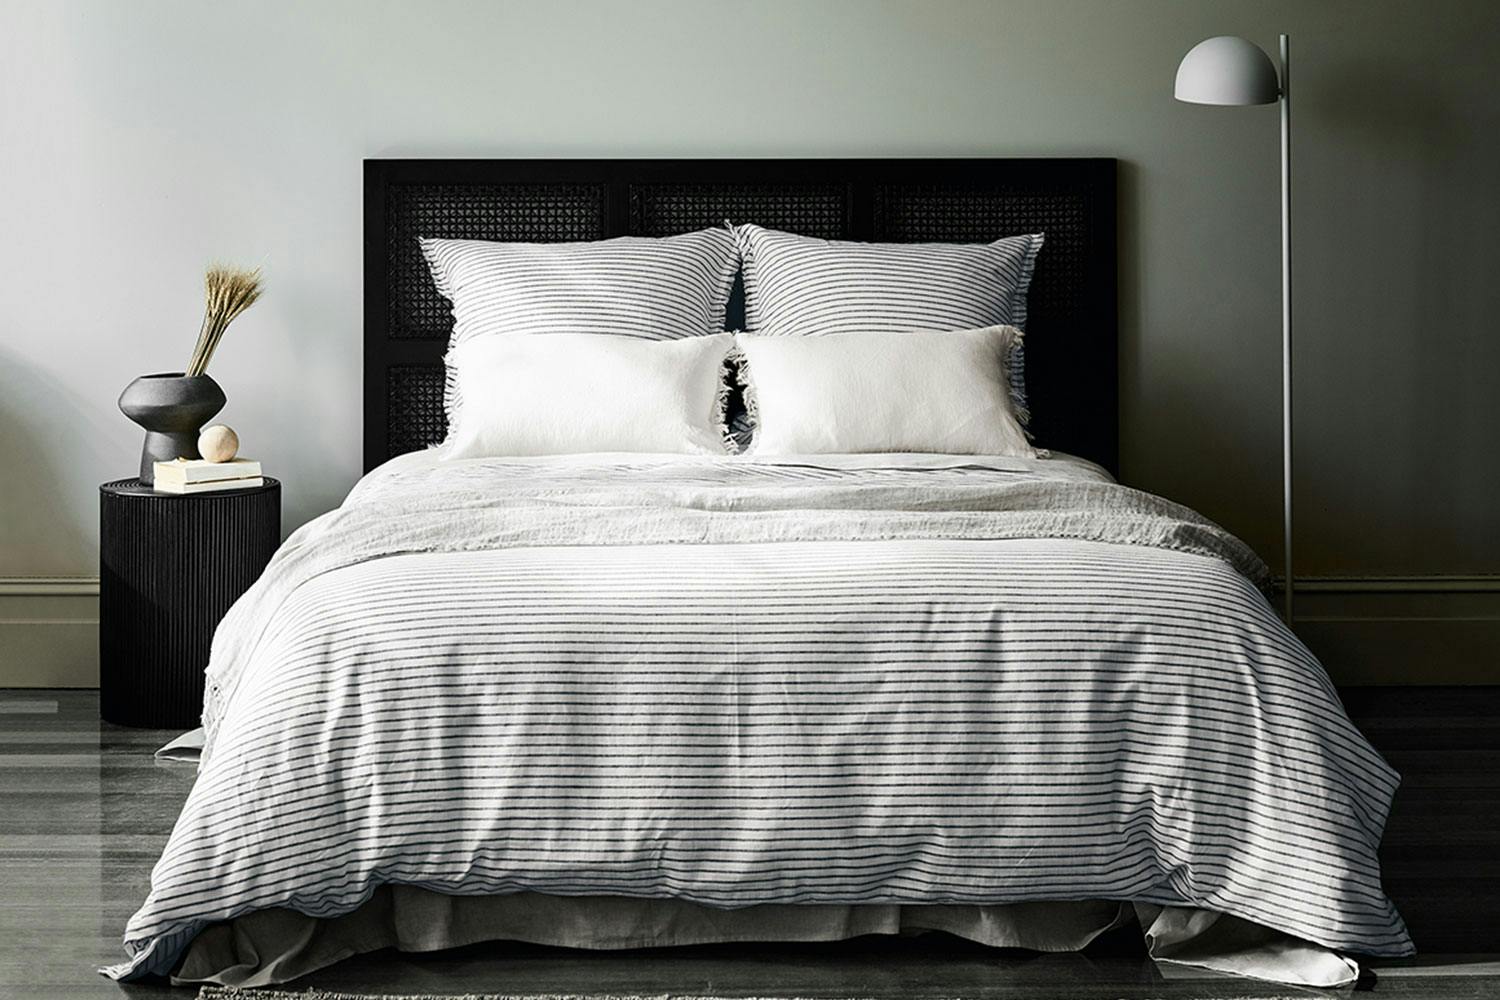 Chambray Stripe Ink Duvet Cover By Aura Harvey Norman New Zealand